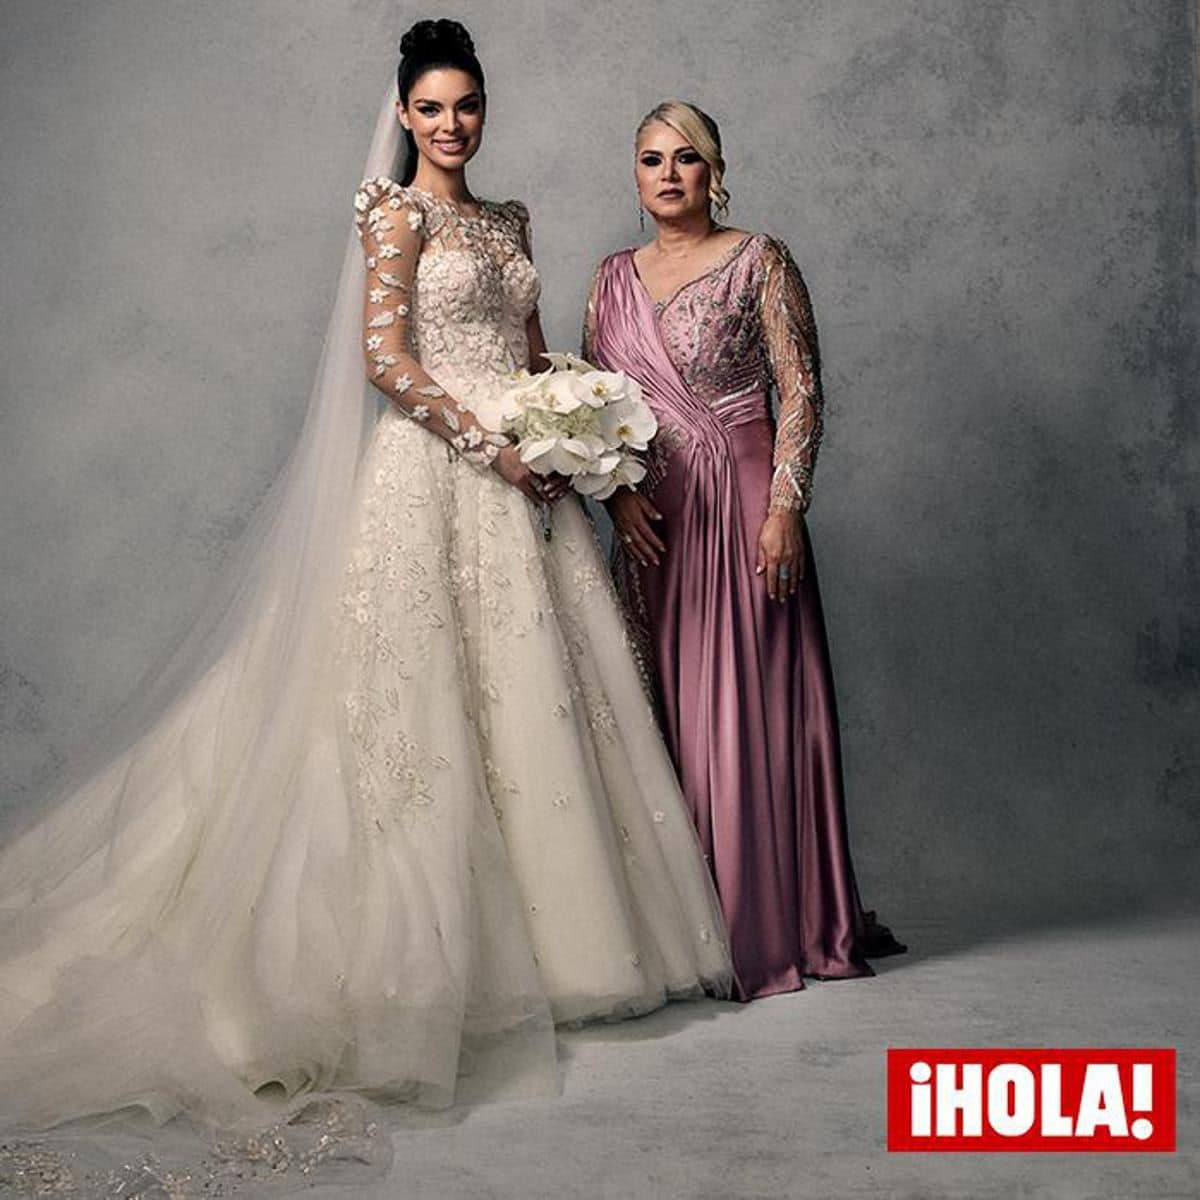 Nadia Ferreira and her mother at the wedding